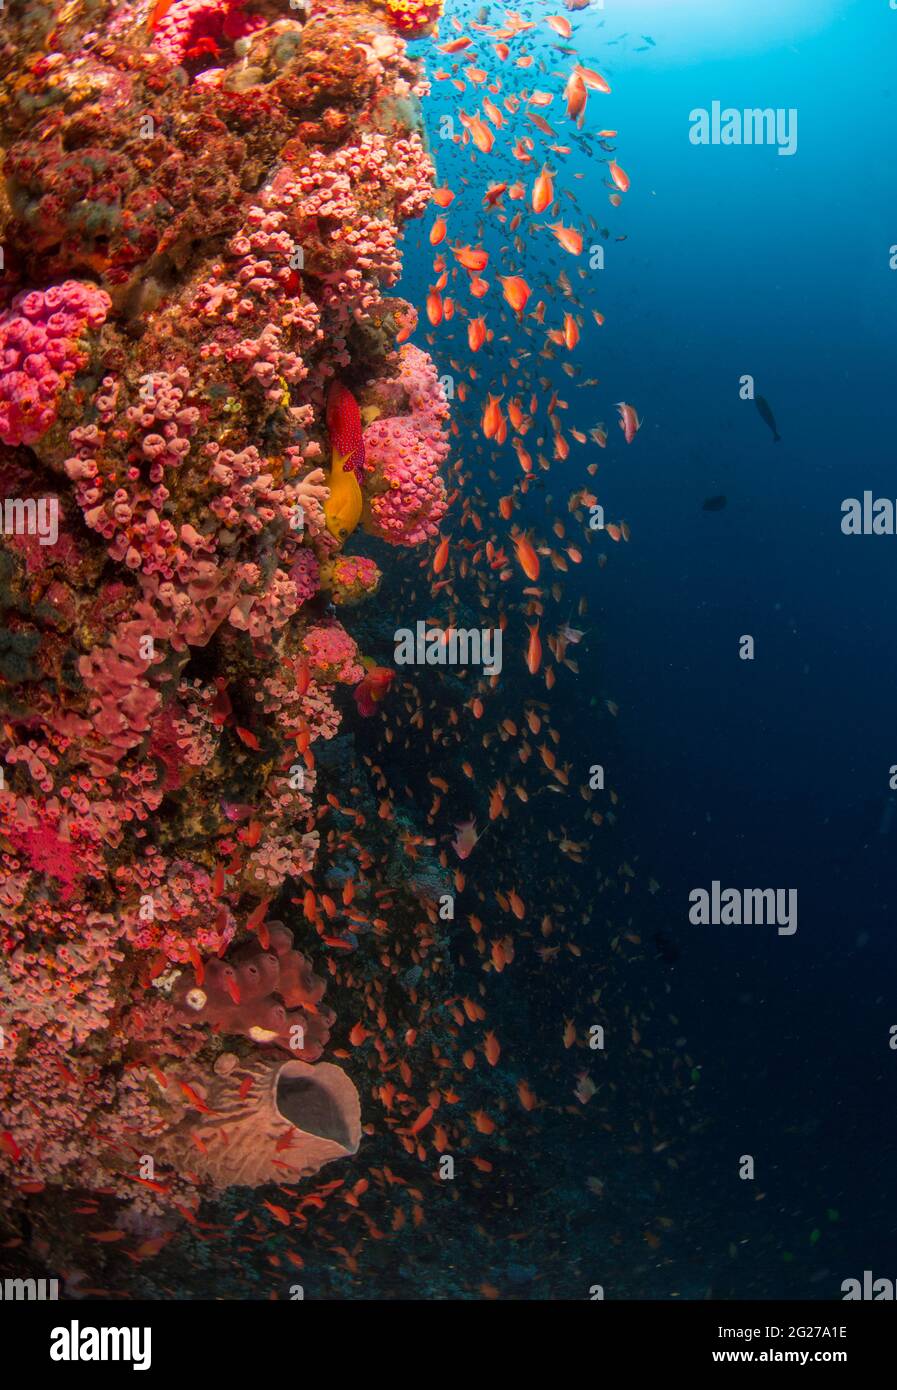 Coral reef wall with hard and soft corals and colorful anthias fish, Verde Island, Philippines. Stock Photo